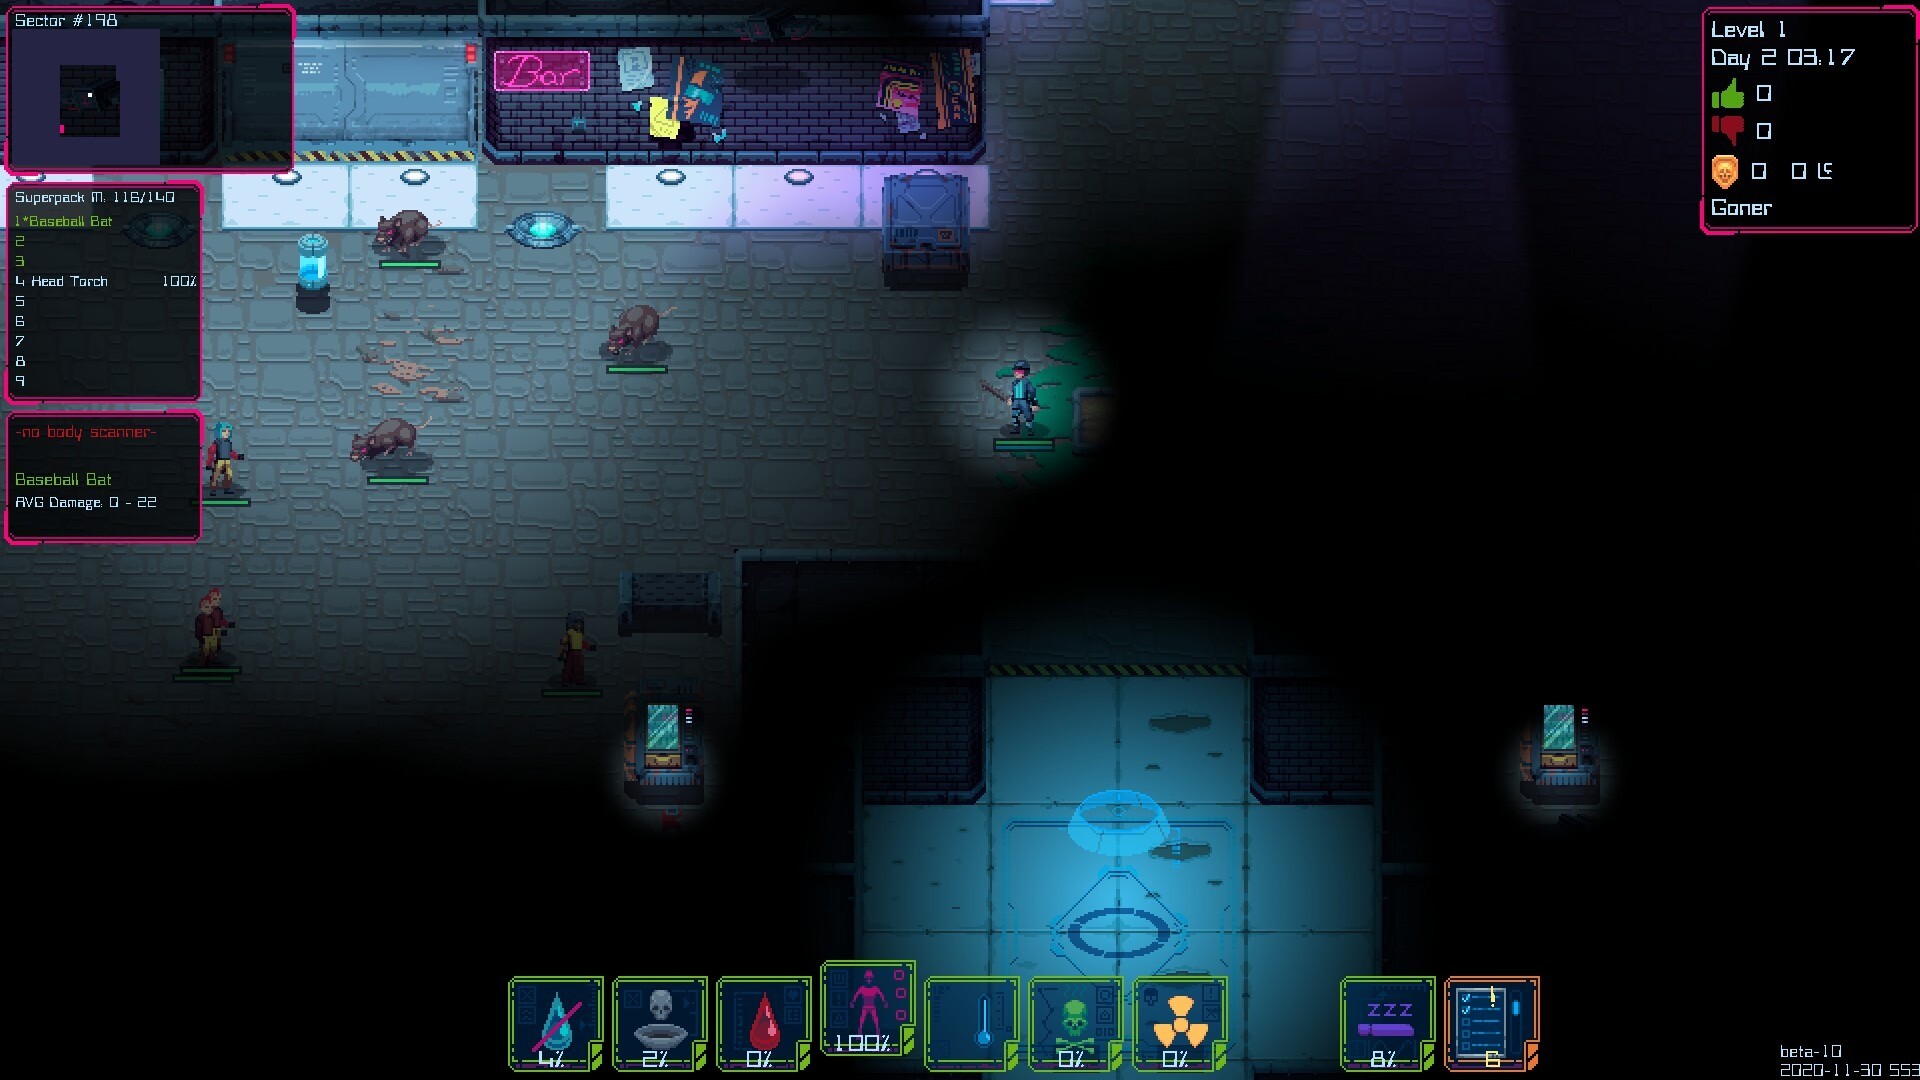 Lethal Running game screenshot, city block at night with giant rats